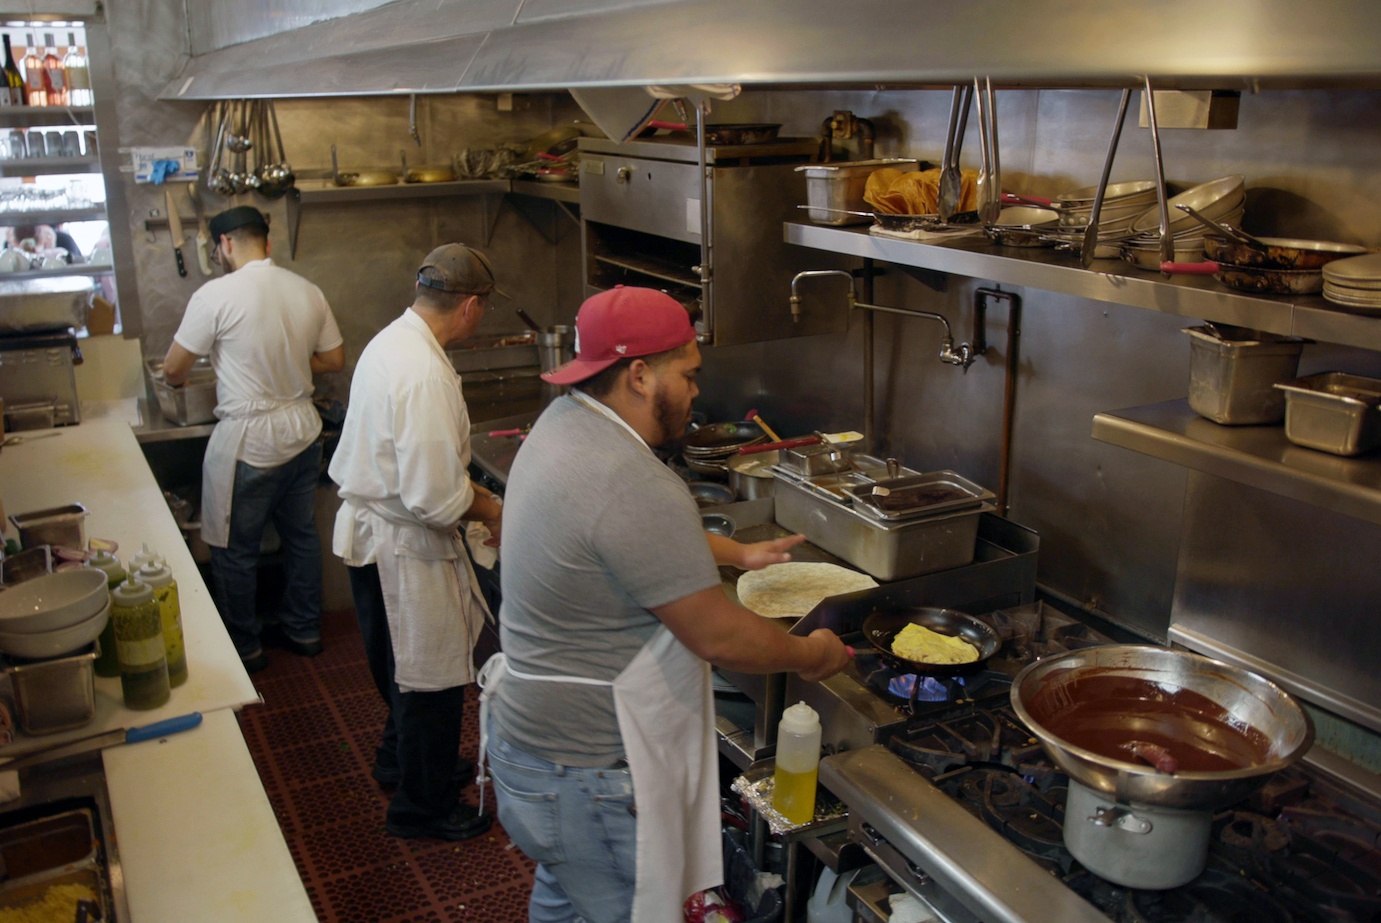 Back of house staff cooking at Huckleberry Cafe in Santa Monica, CA (March 2020)